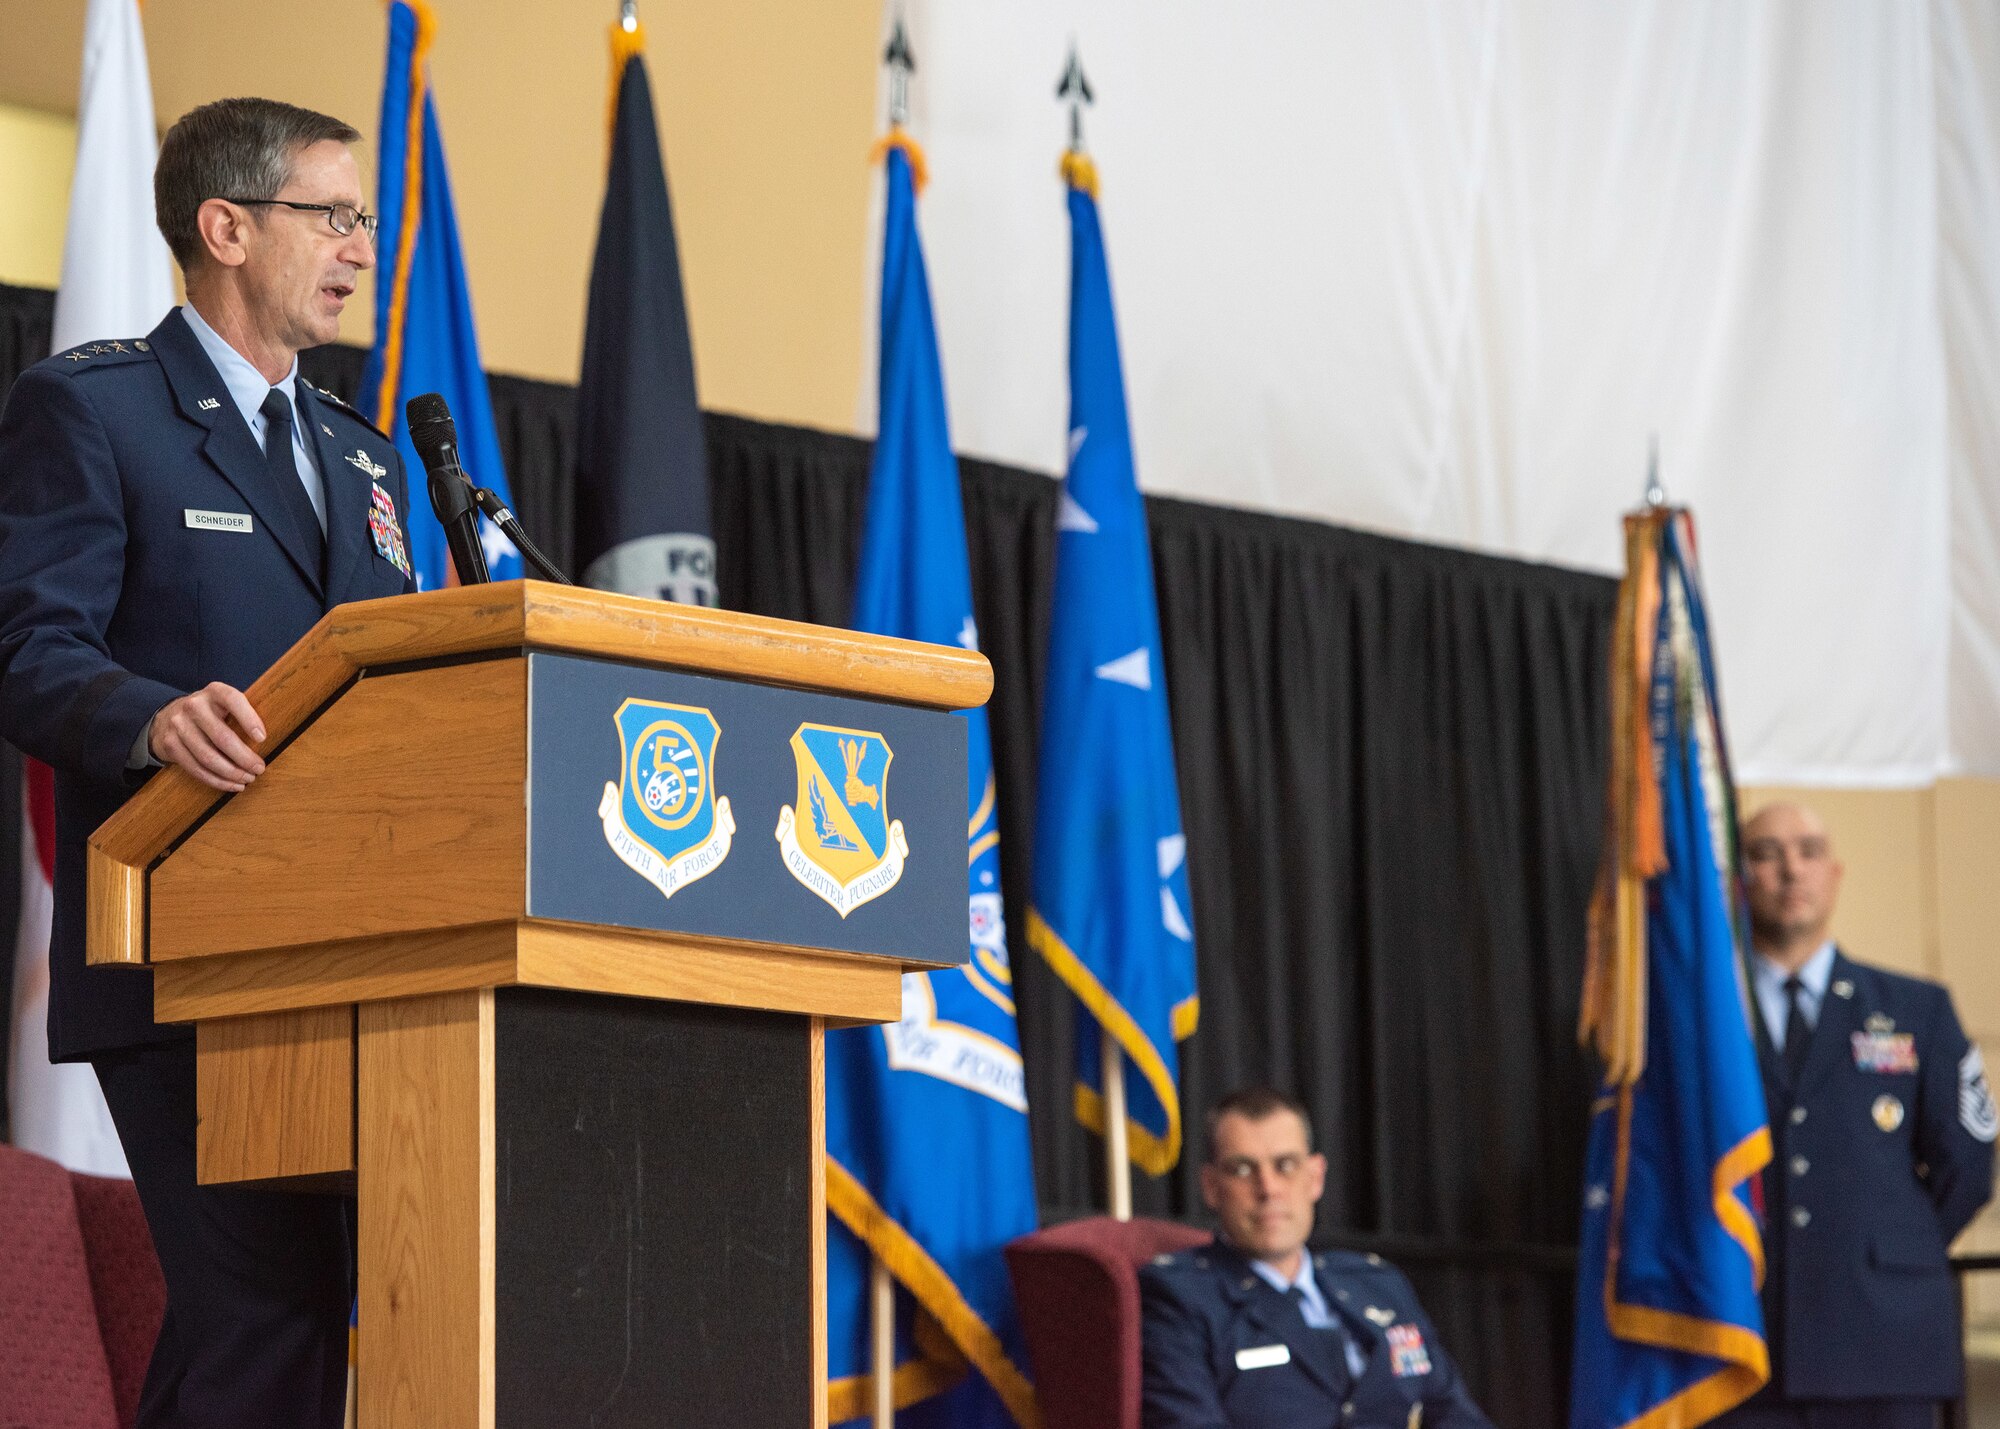 Col. Campbell assumes command of the 374th AW